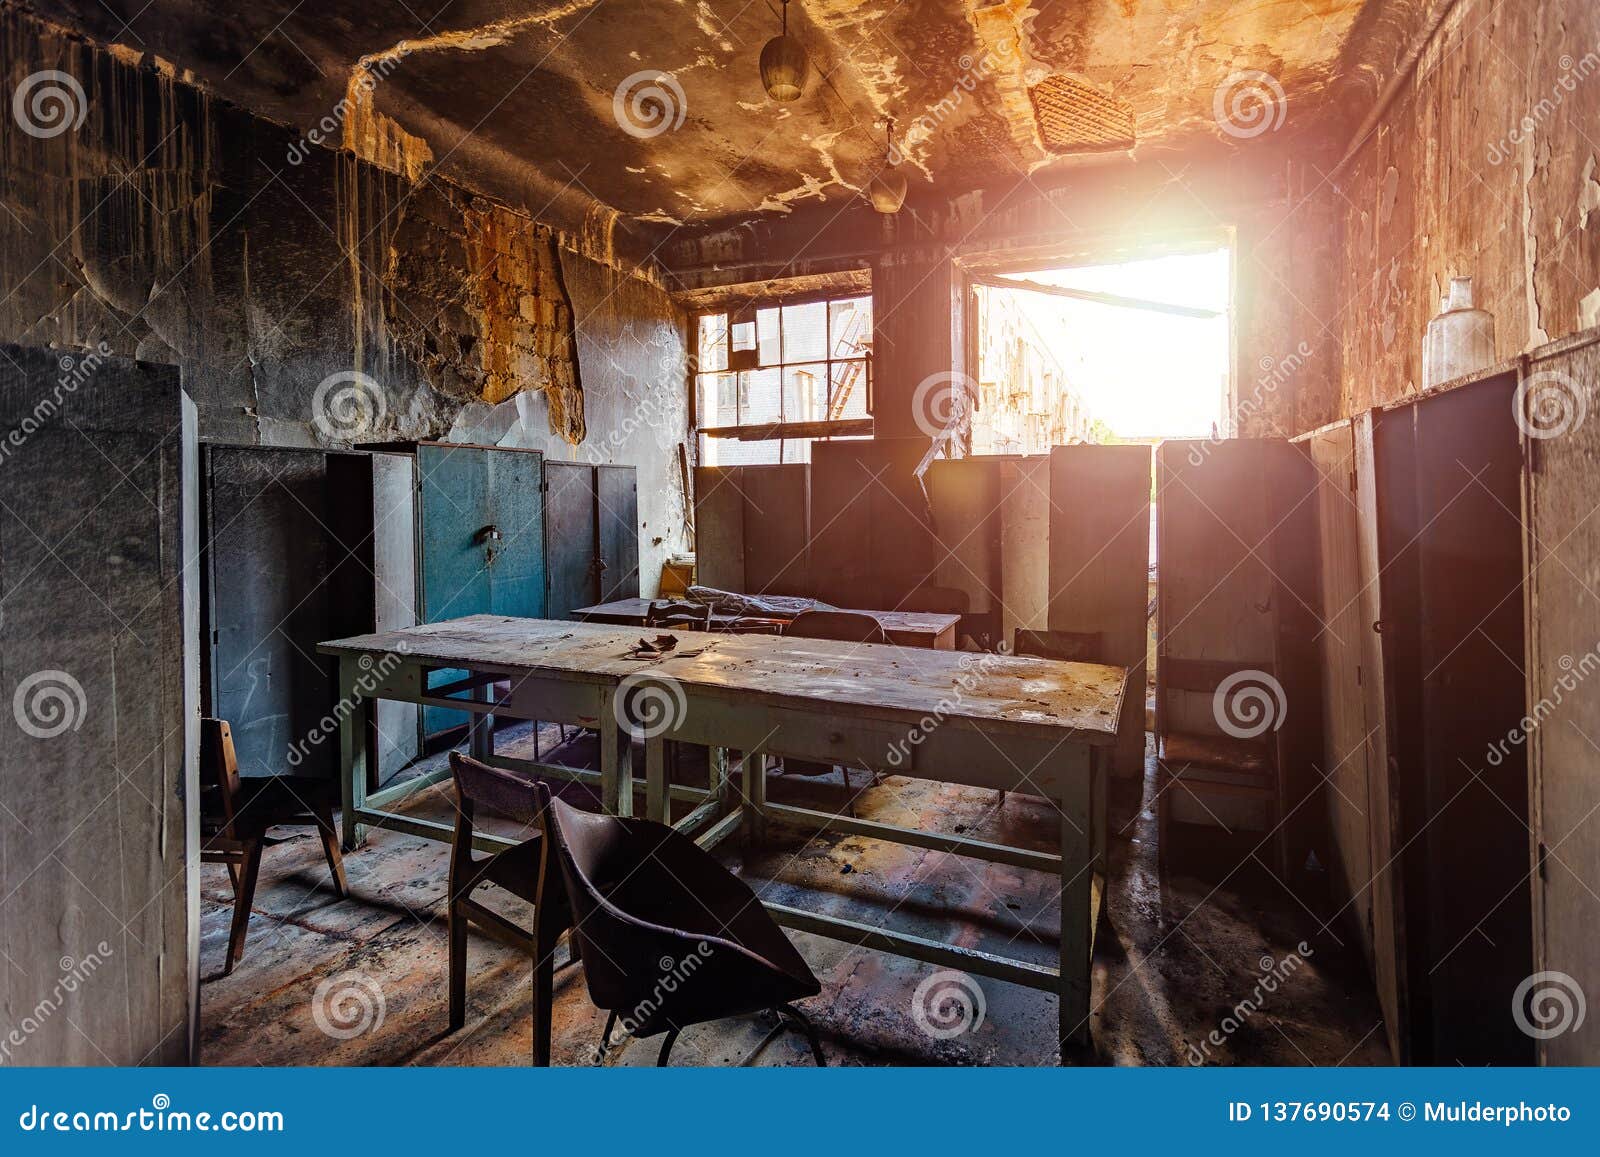 Burned Interiors And Furniture In Industrial Or Office